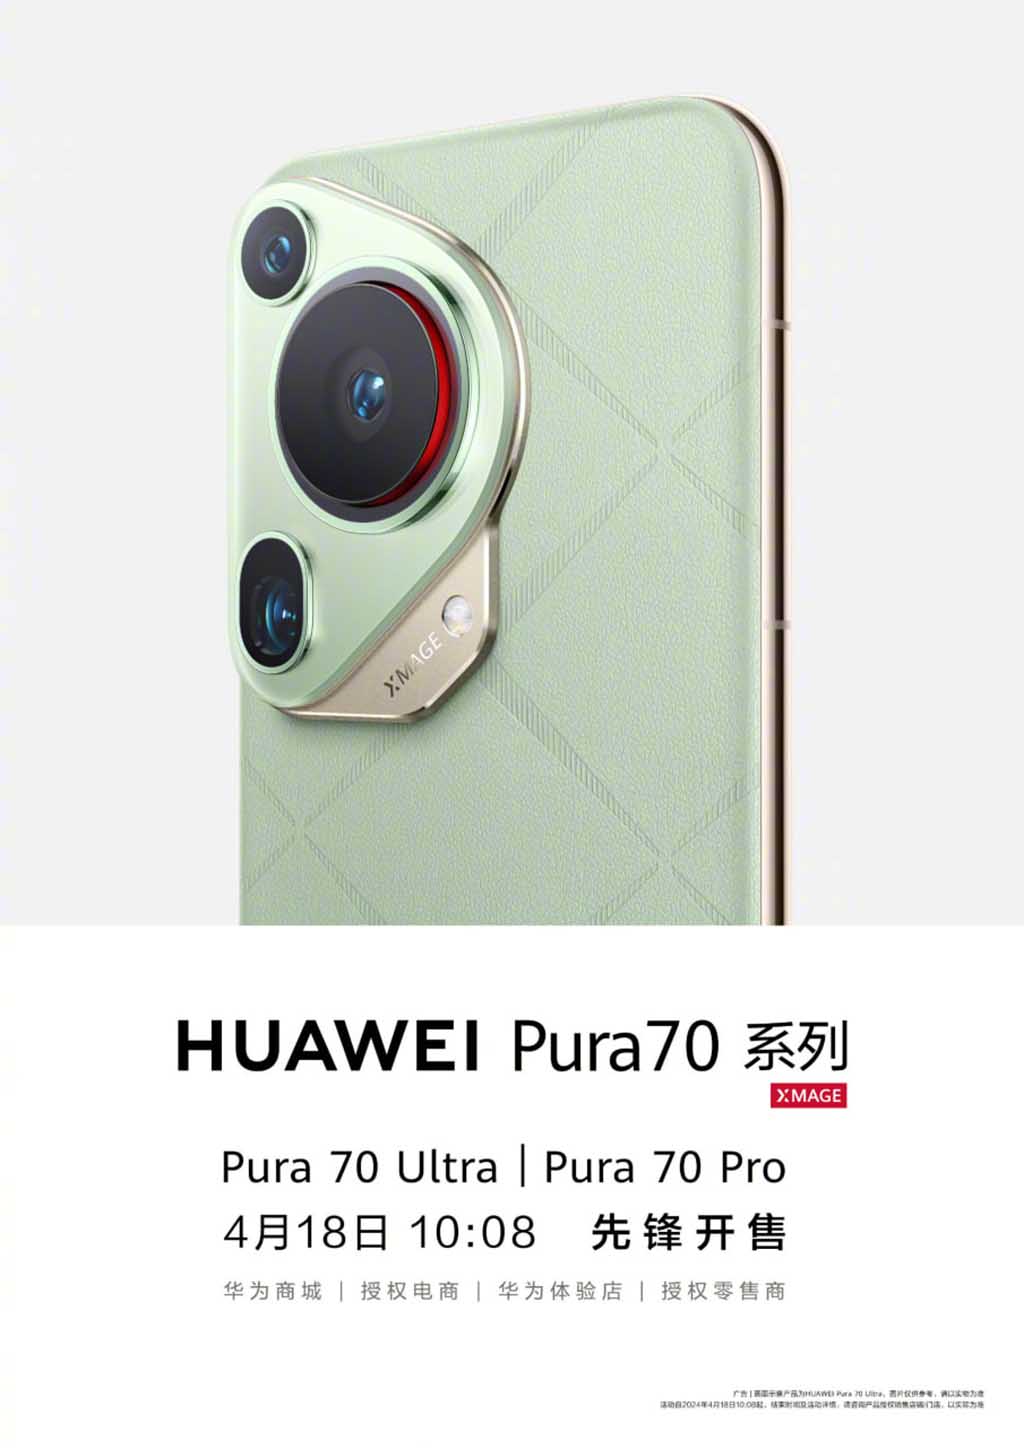 Huawei Pura 70 Pro+ Specifications and Price (Image Credits: Huawei)